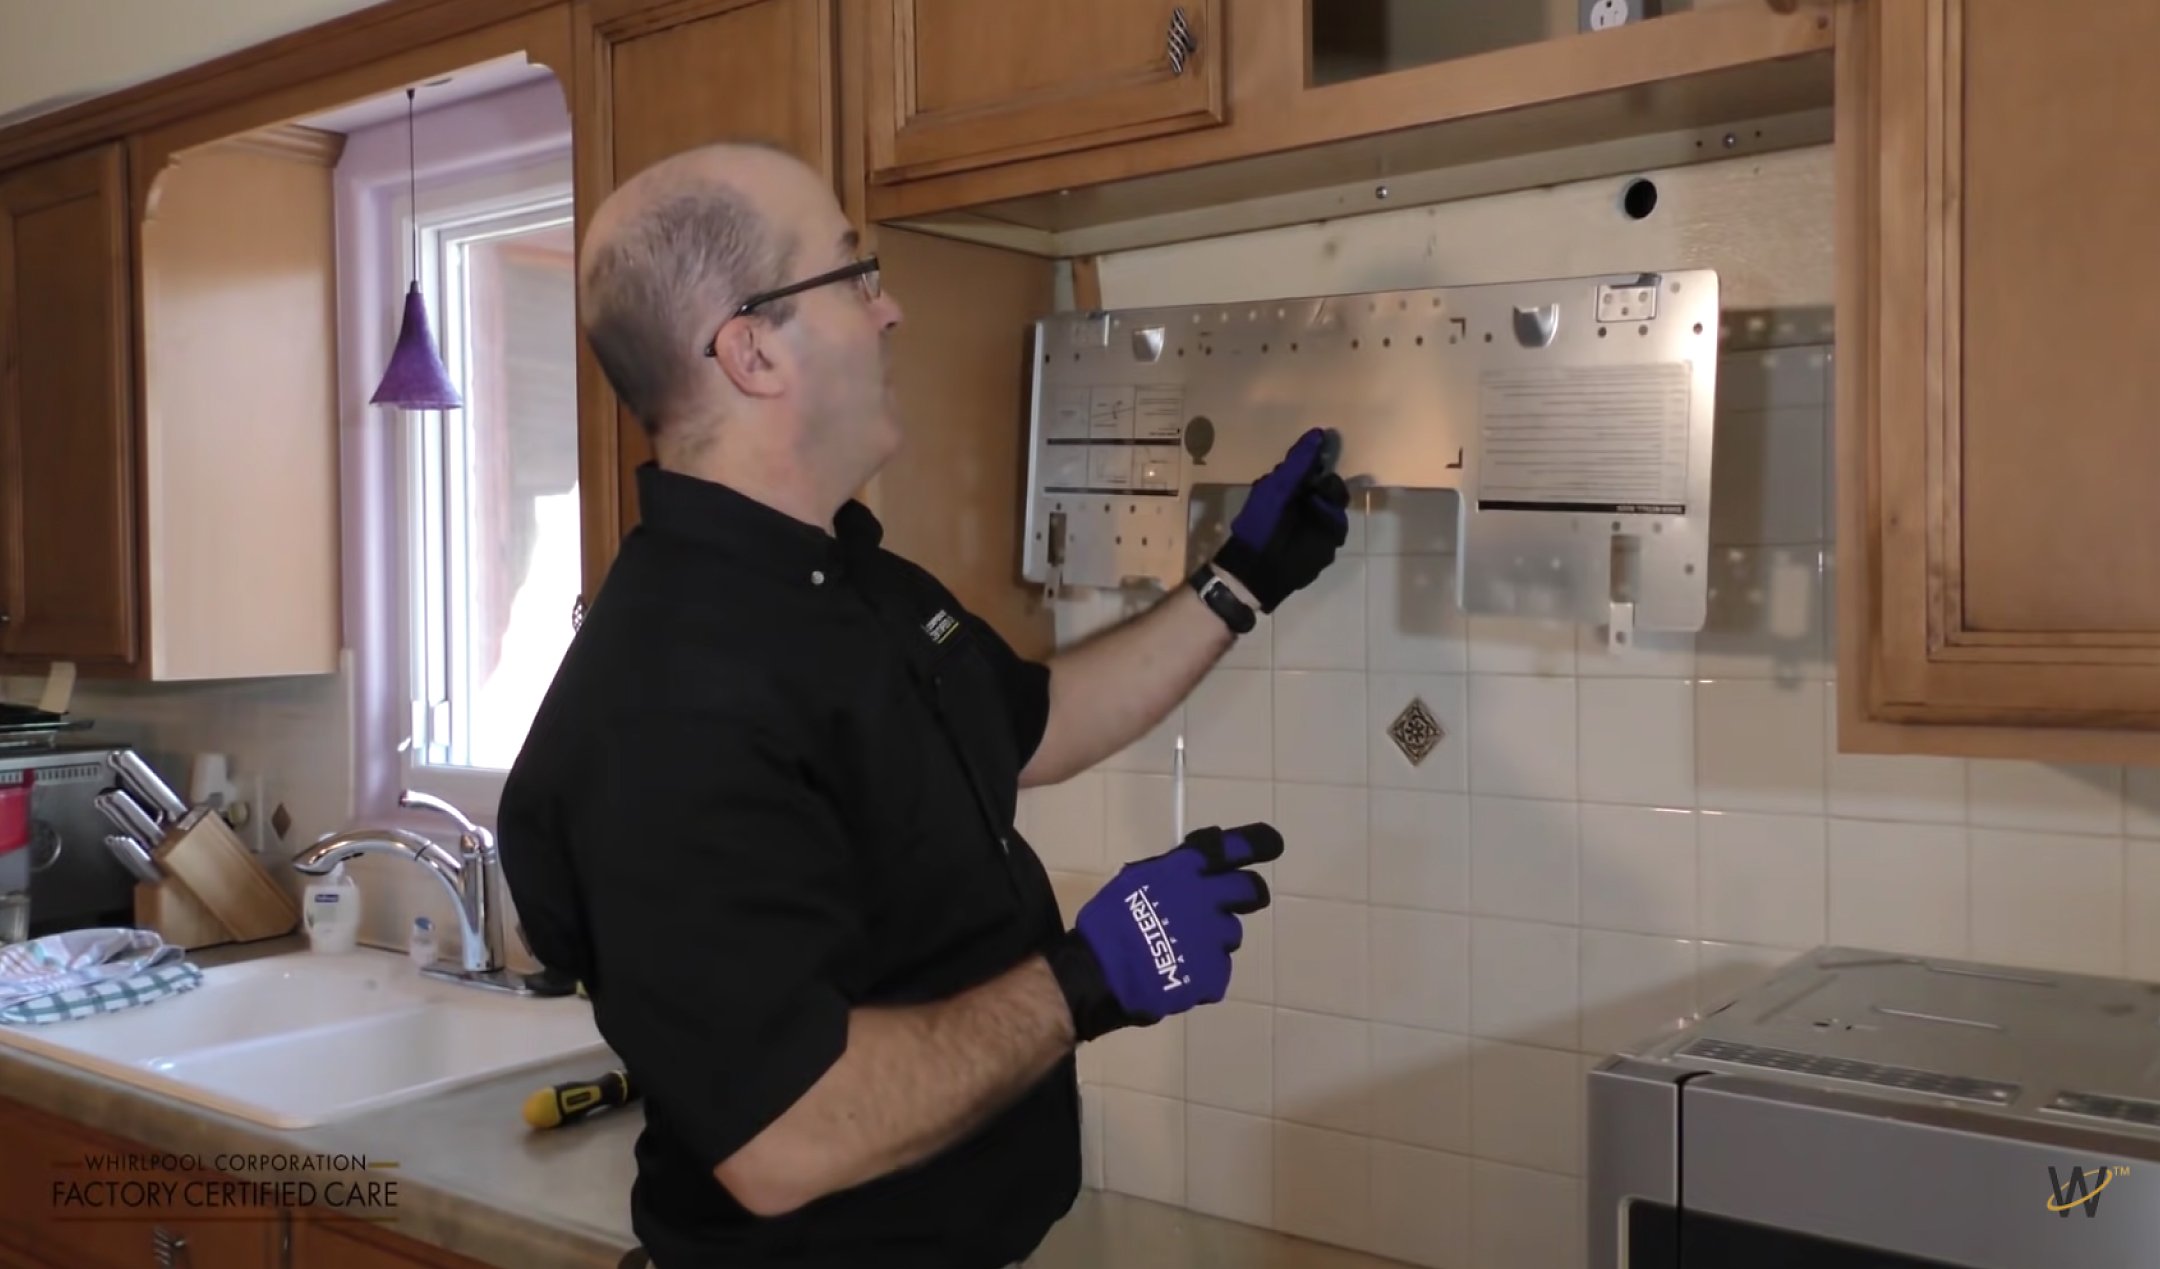 How to Install an Over-the-Range Microwave